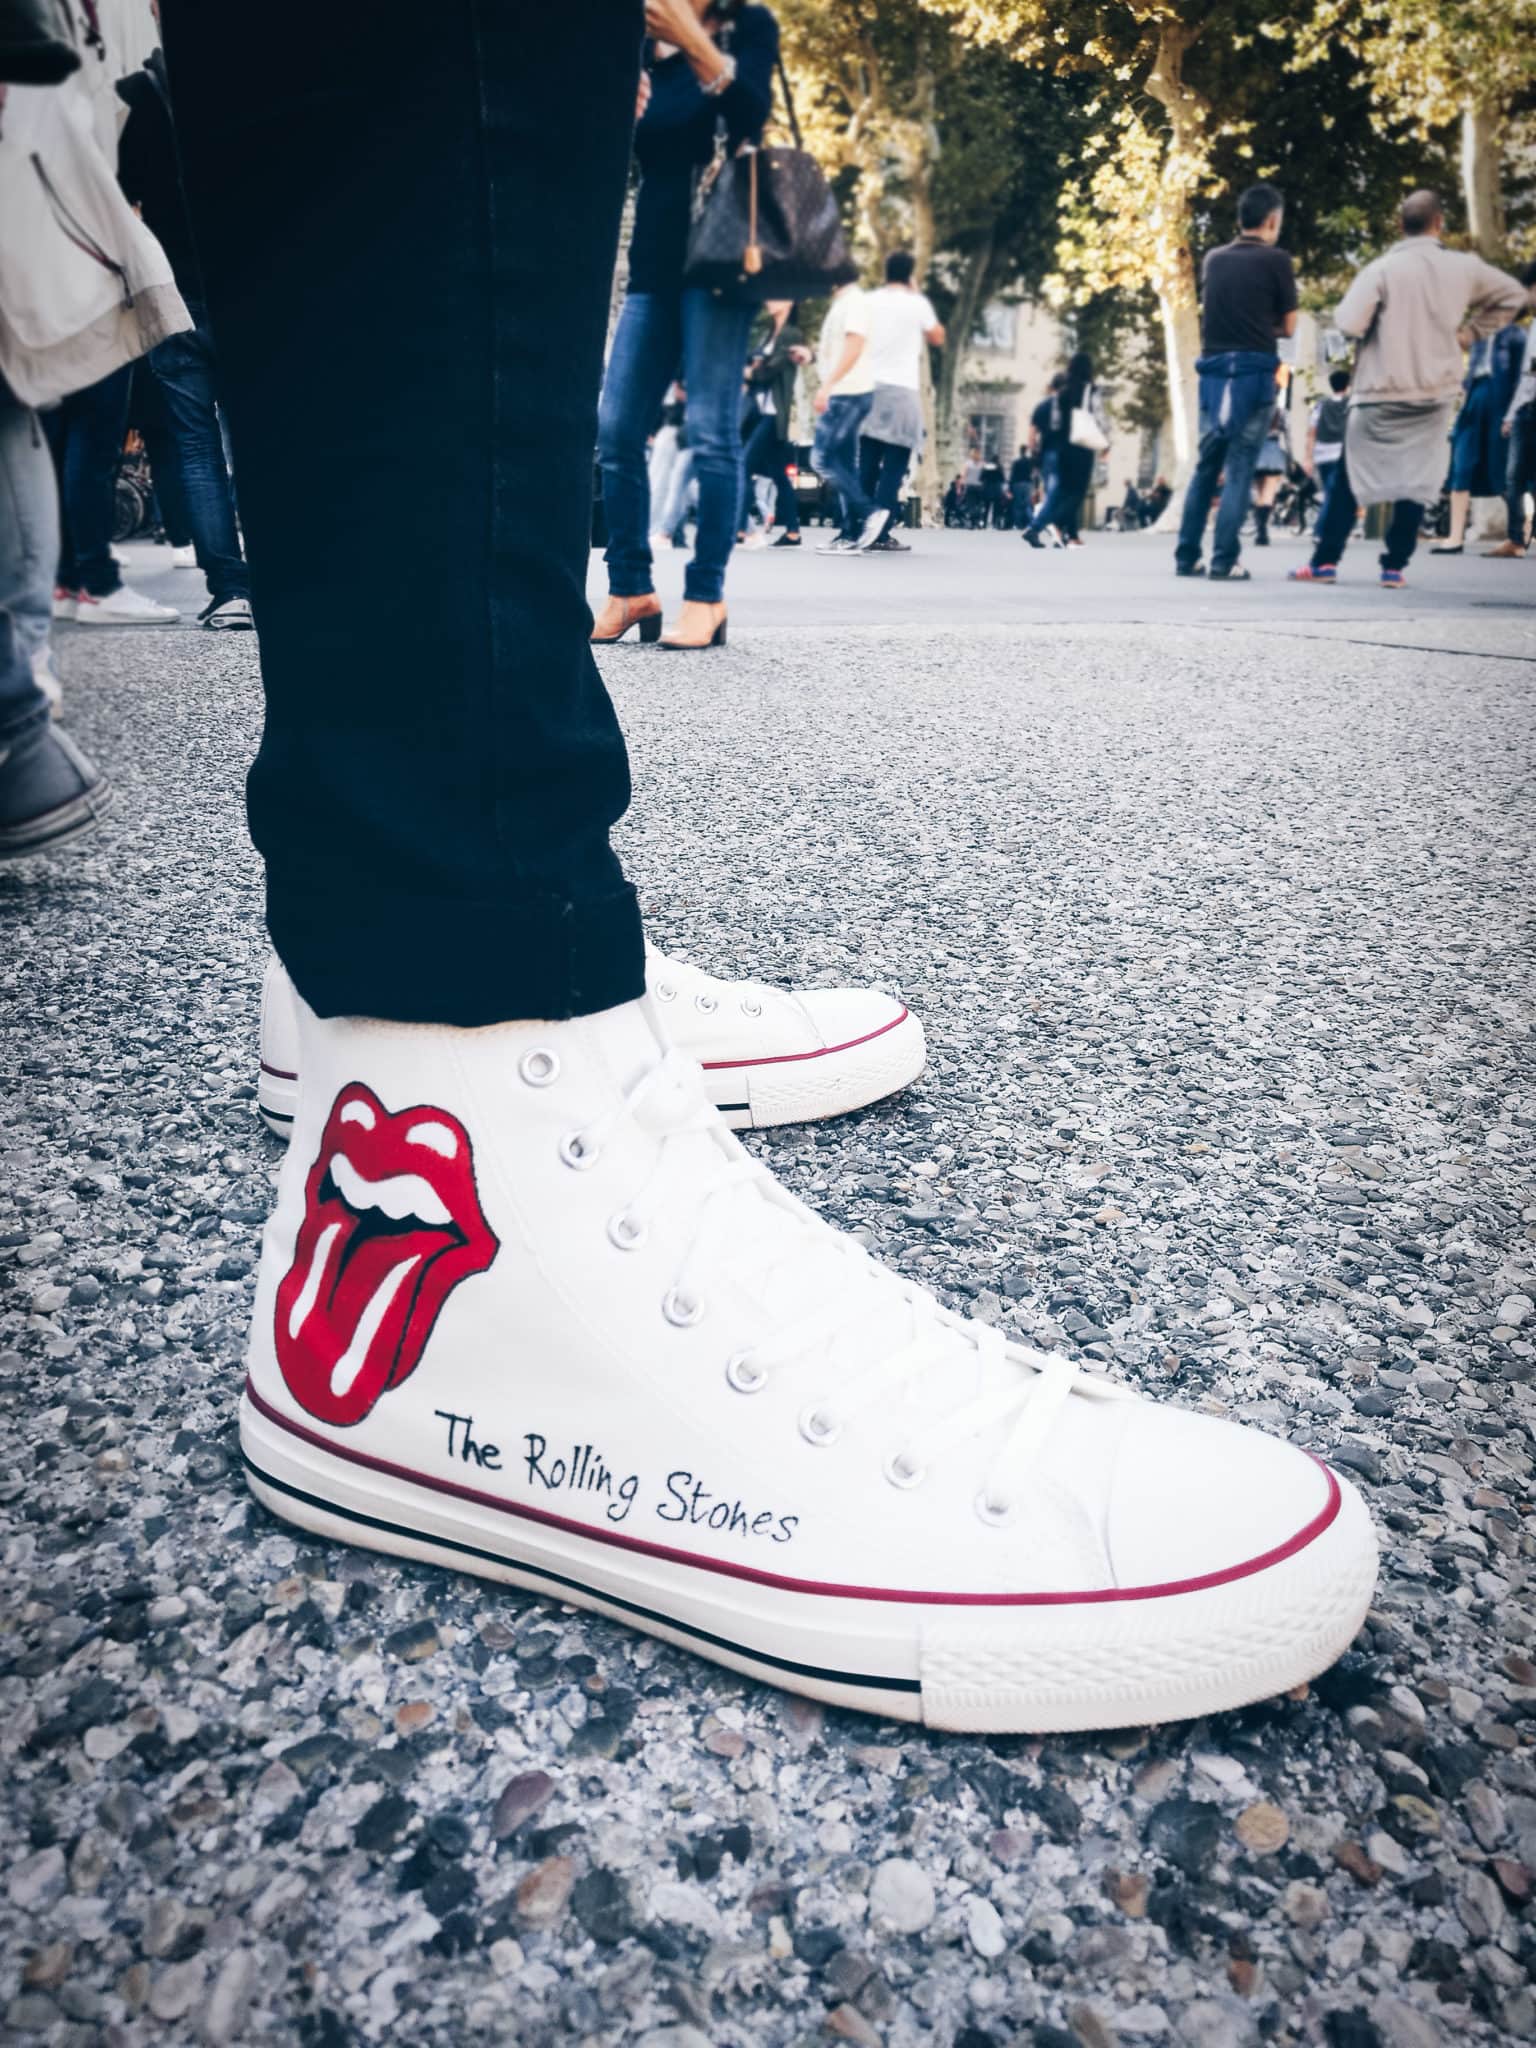 Shoes of the Rolling Stones in Lucca